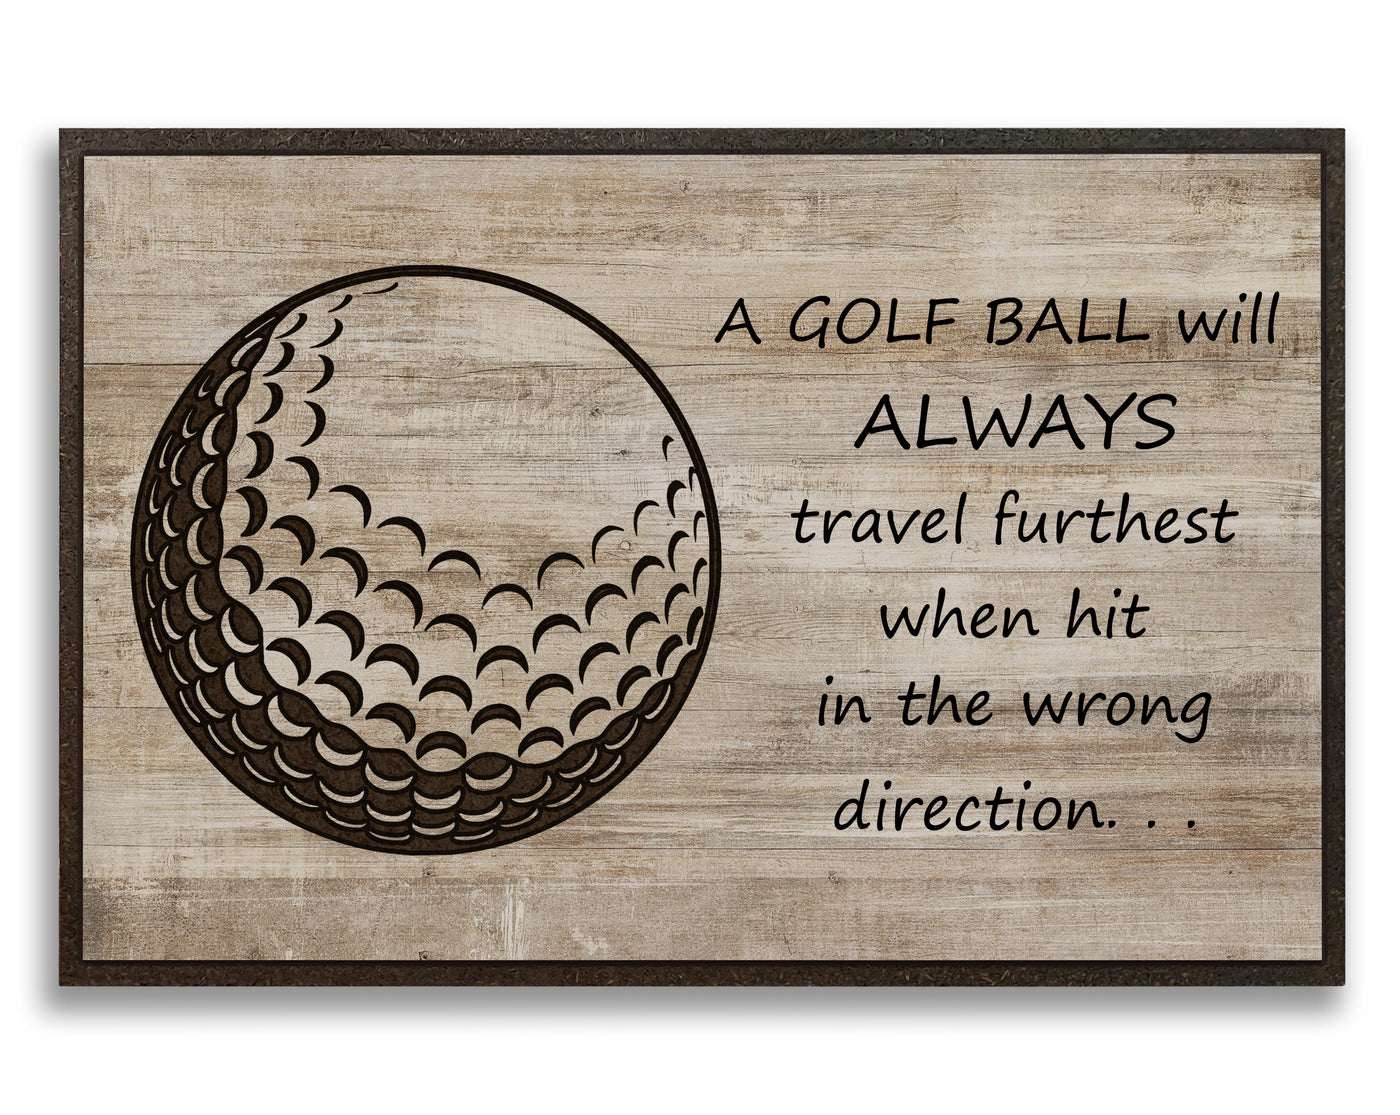 Golf Quote Wood Wall Art